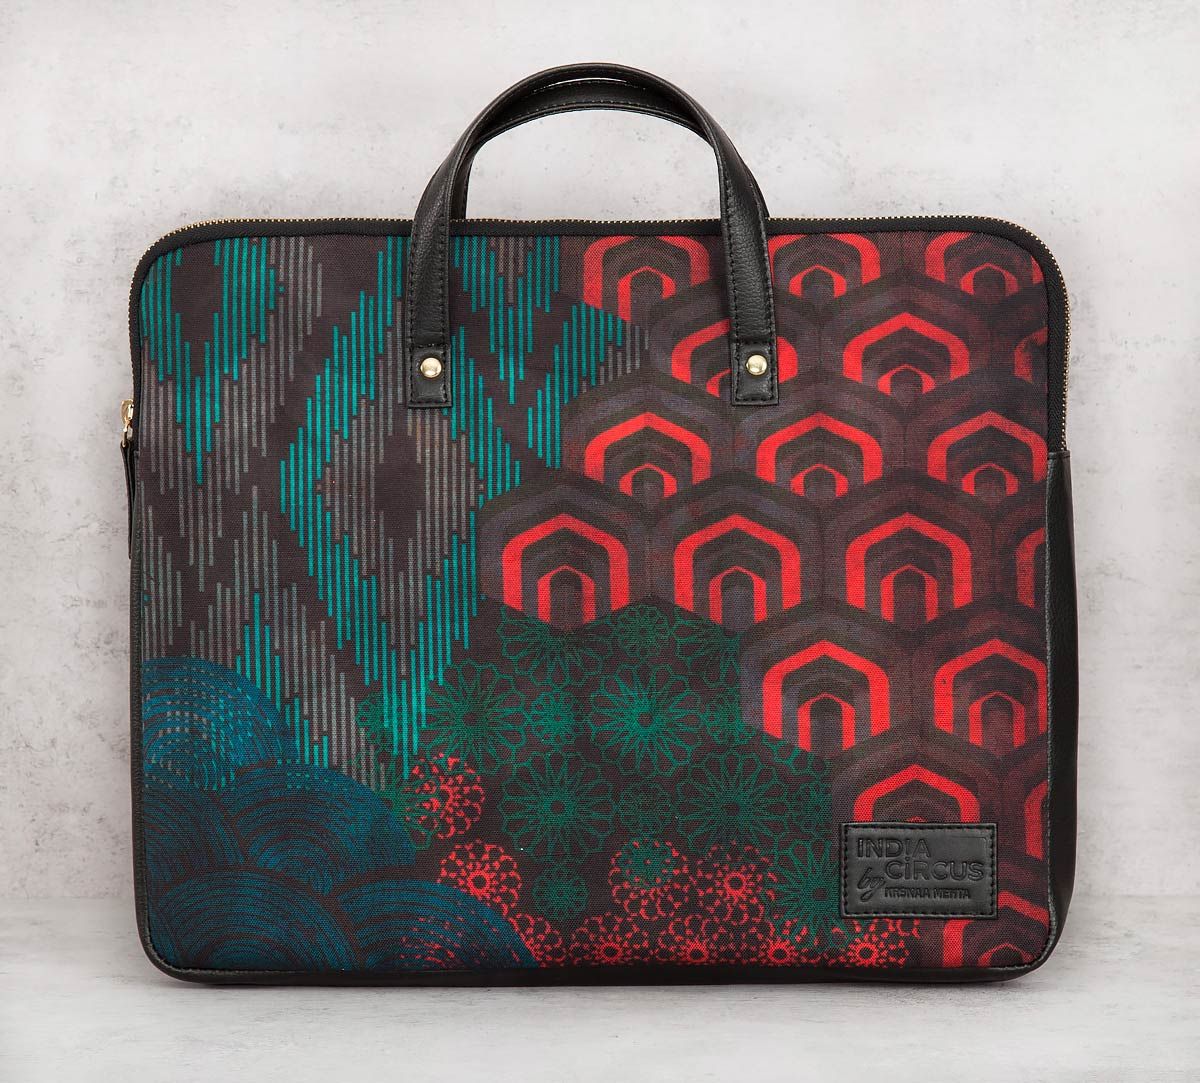 India Circus by Krsnaa Mehta Forests of Fantasy Wall Laptop Bag